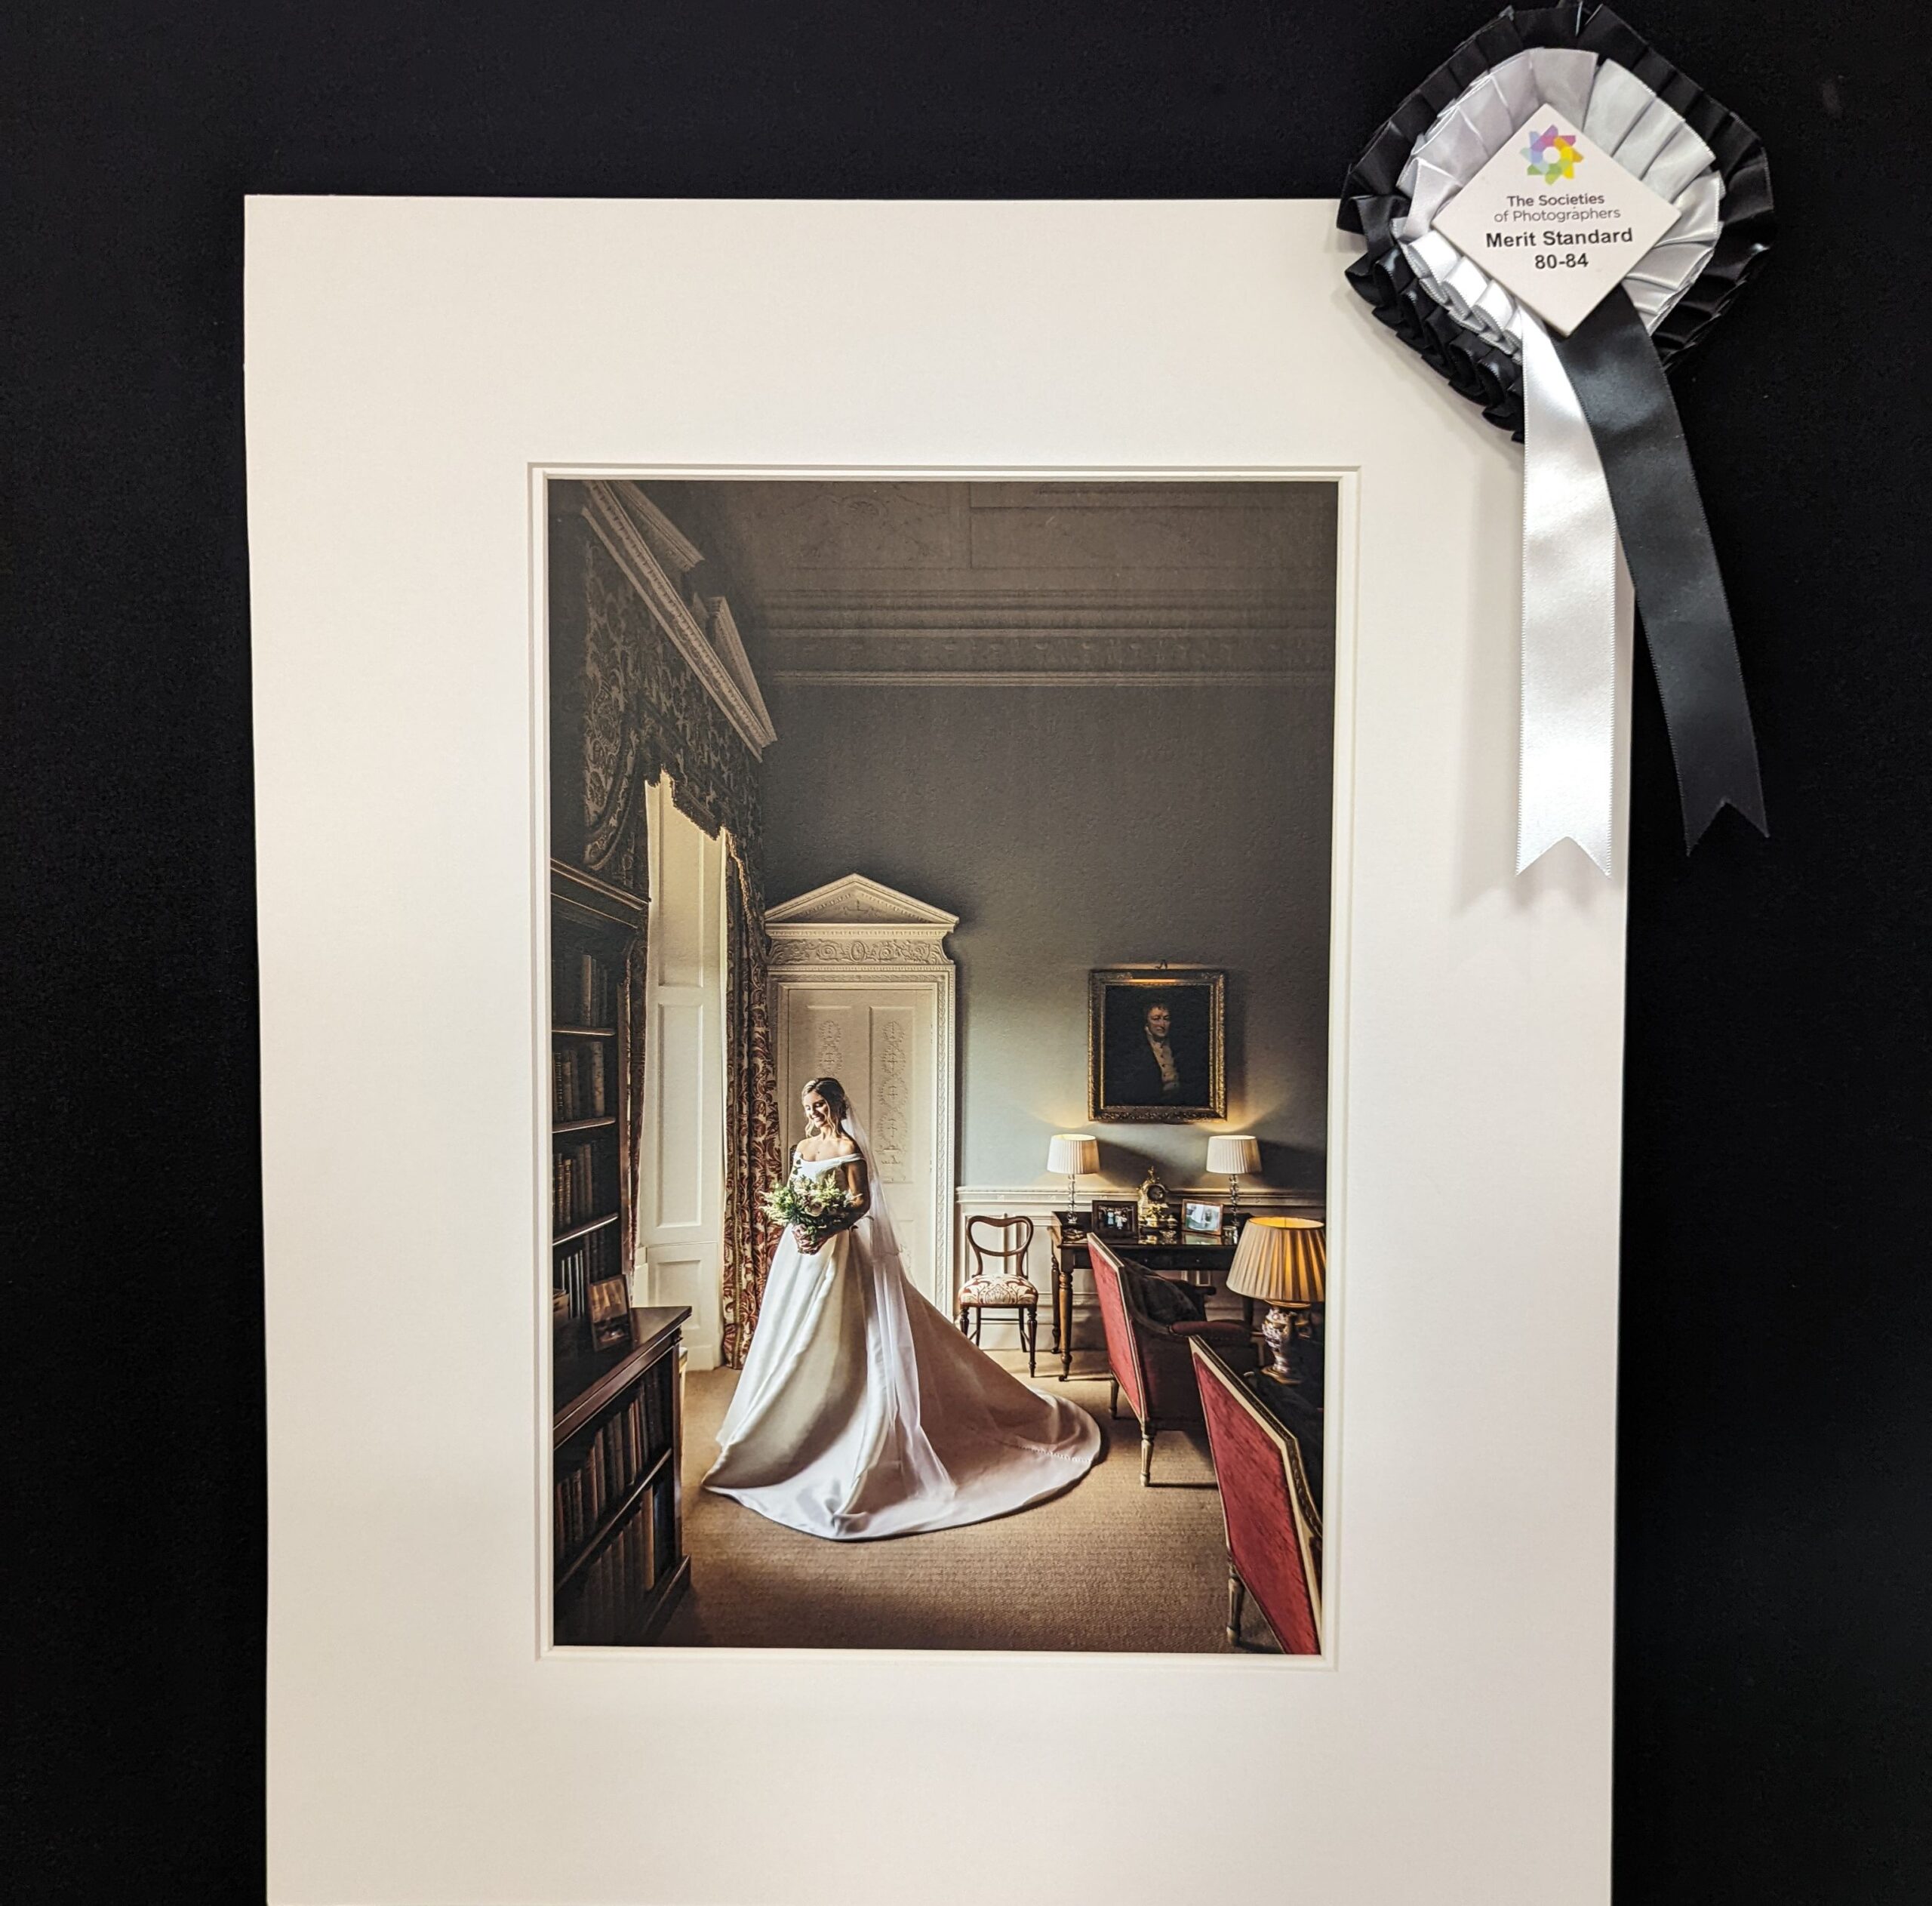 Matthew Rycraft, who runs Matthew Rycraft Wedding Photography & Rycraft Studios in Birkdale, has snapped his way to five major awards in the Society of Wedding and Portrait Photographers competition in London